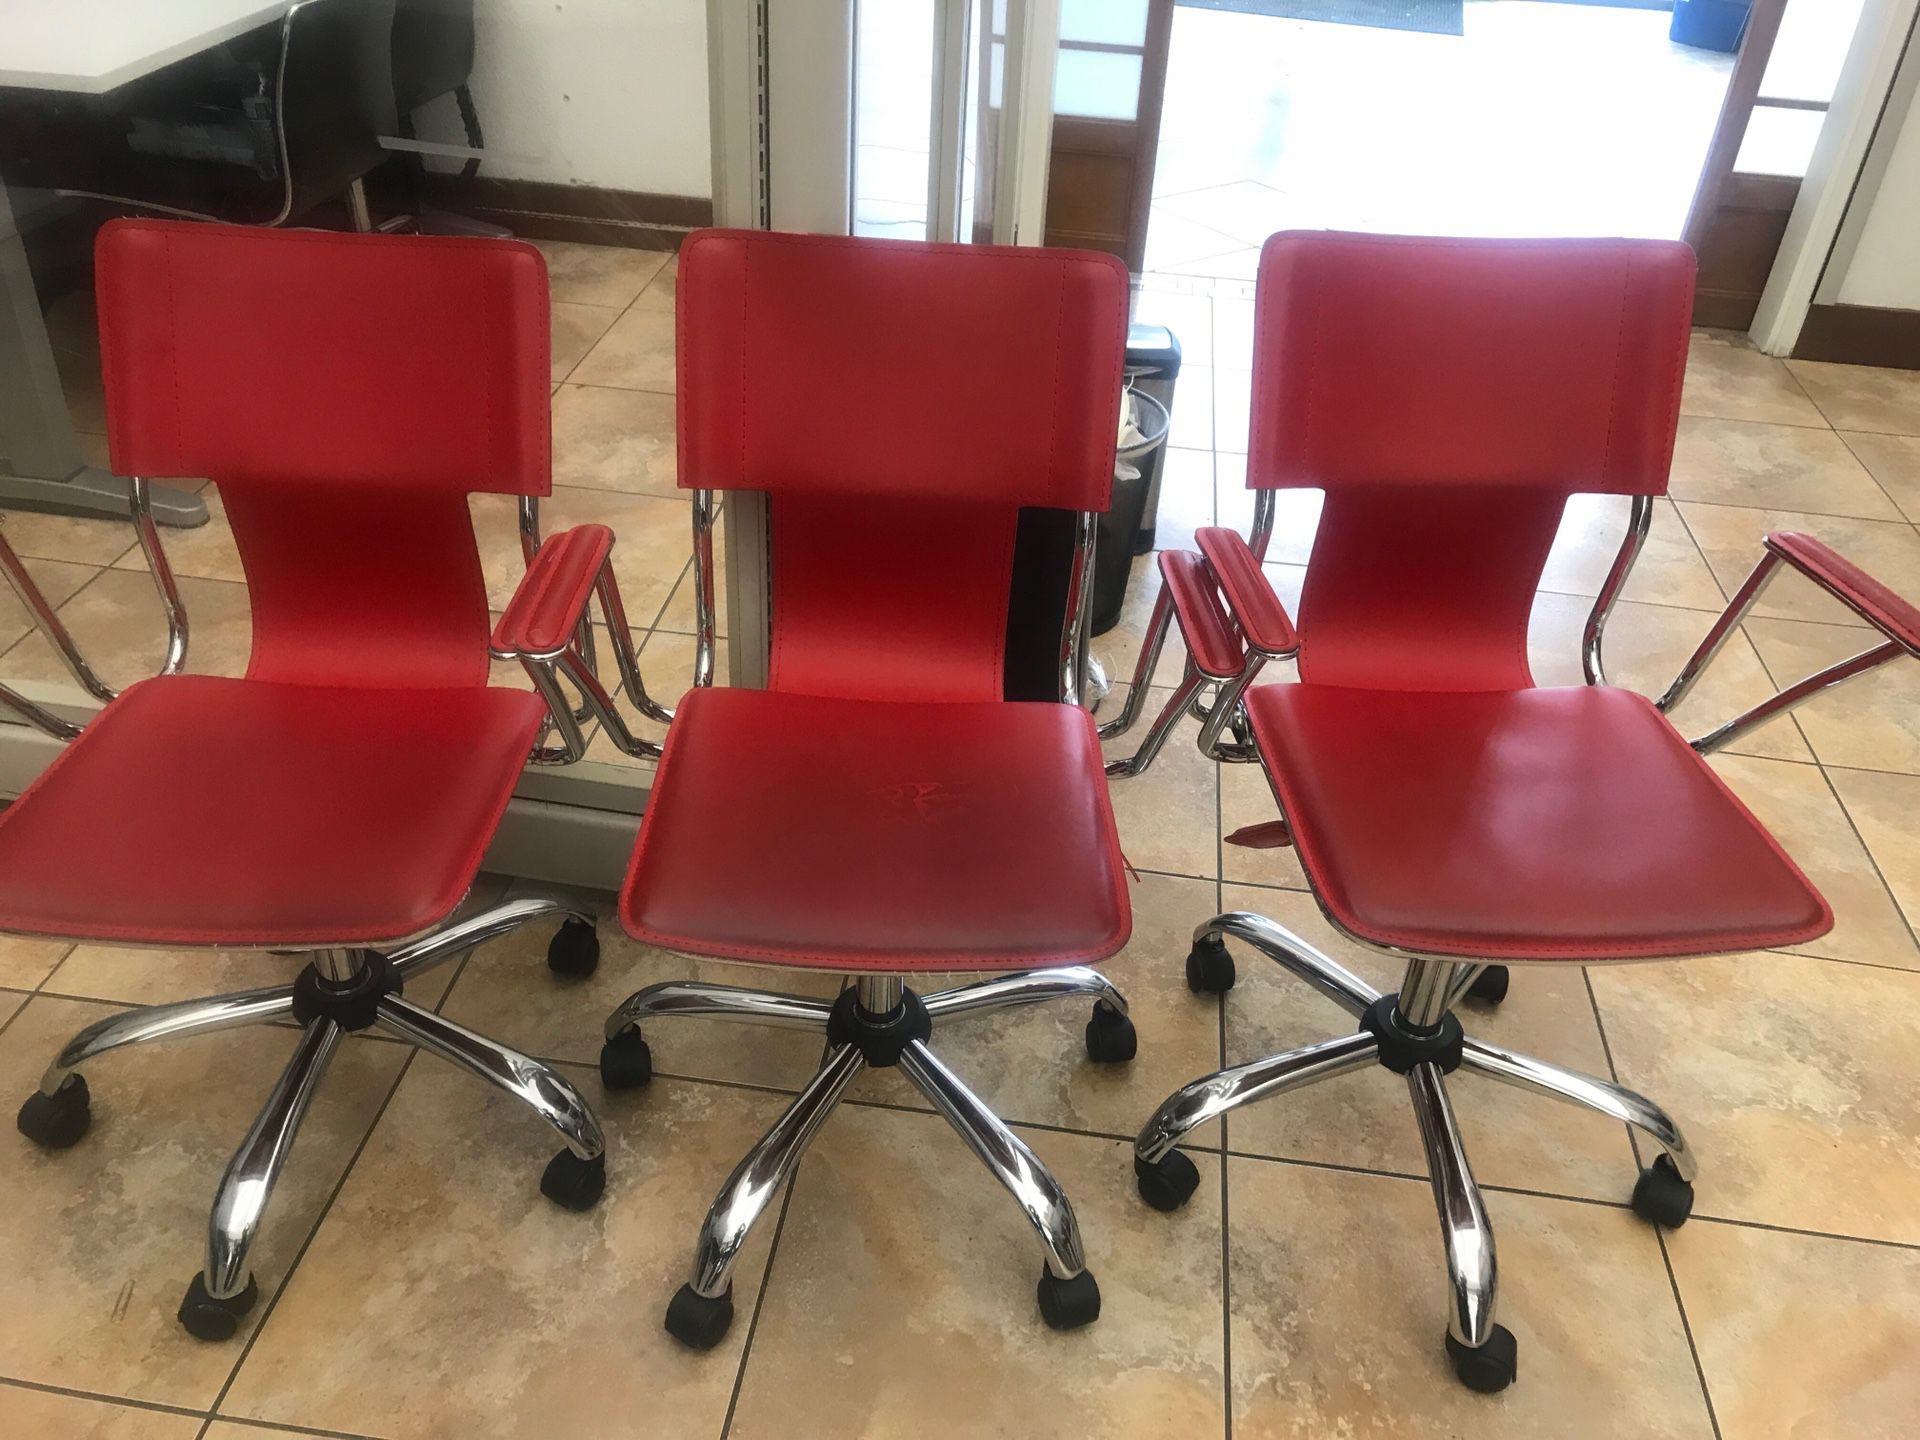 Chairs, red chairs, office chairs, office furniture & more.